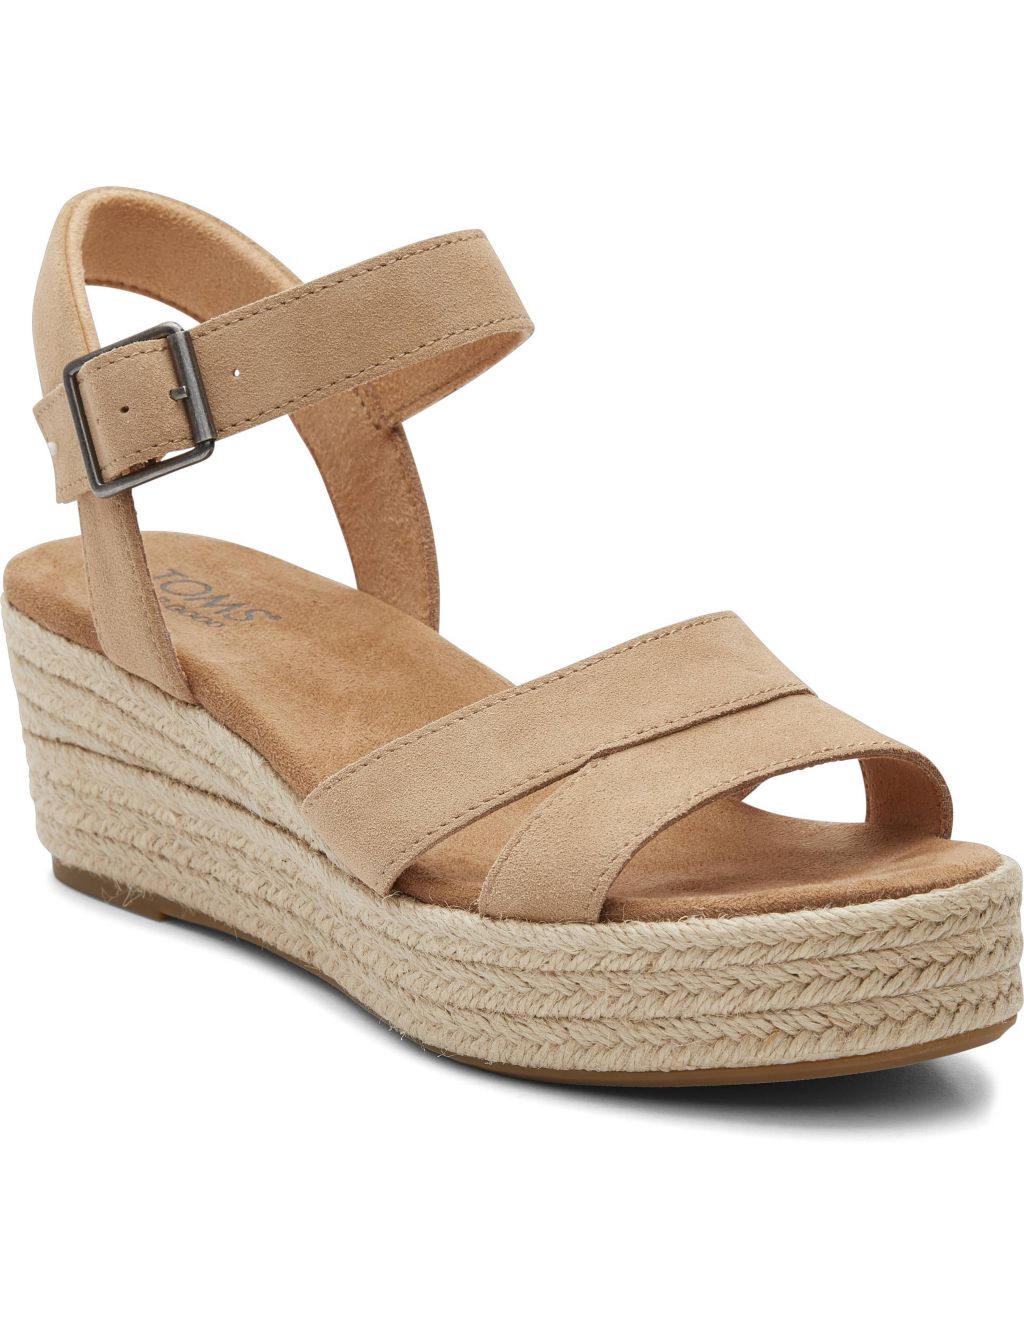 Suede Ankle Strap Wedge Sandals